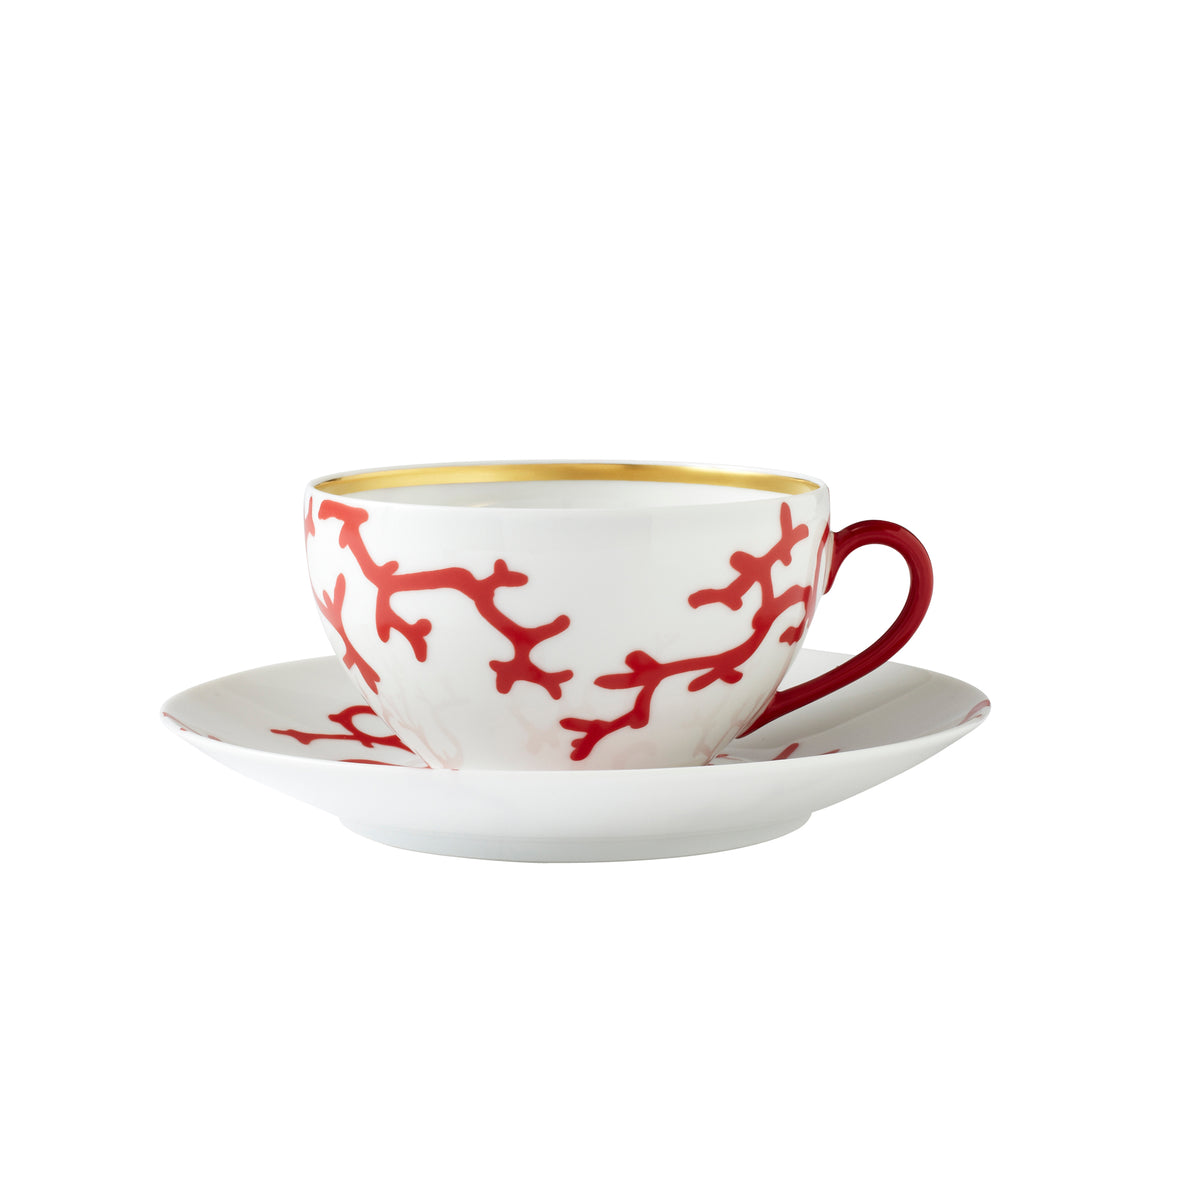 Cristobal  Breakfast Cup and Saucer